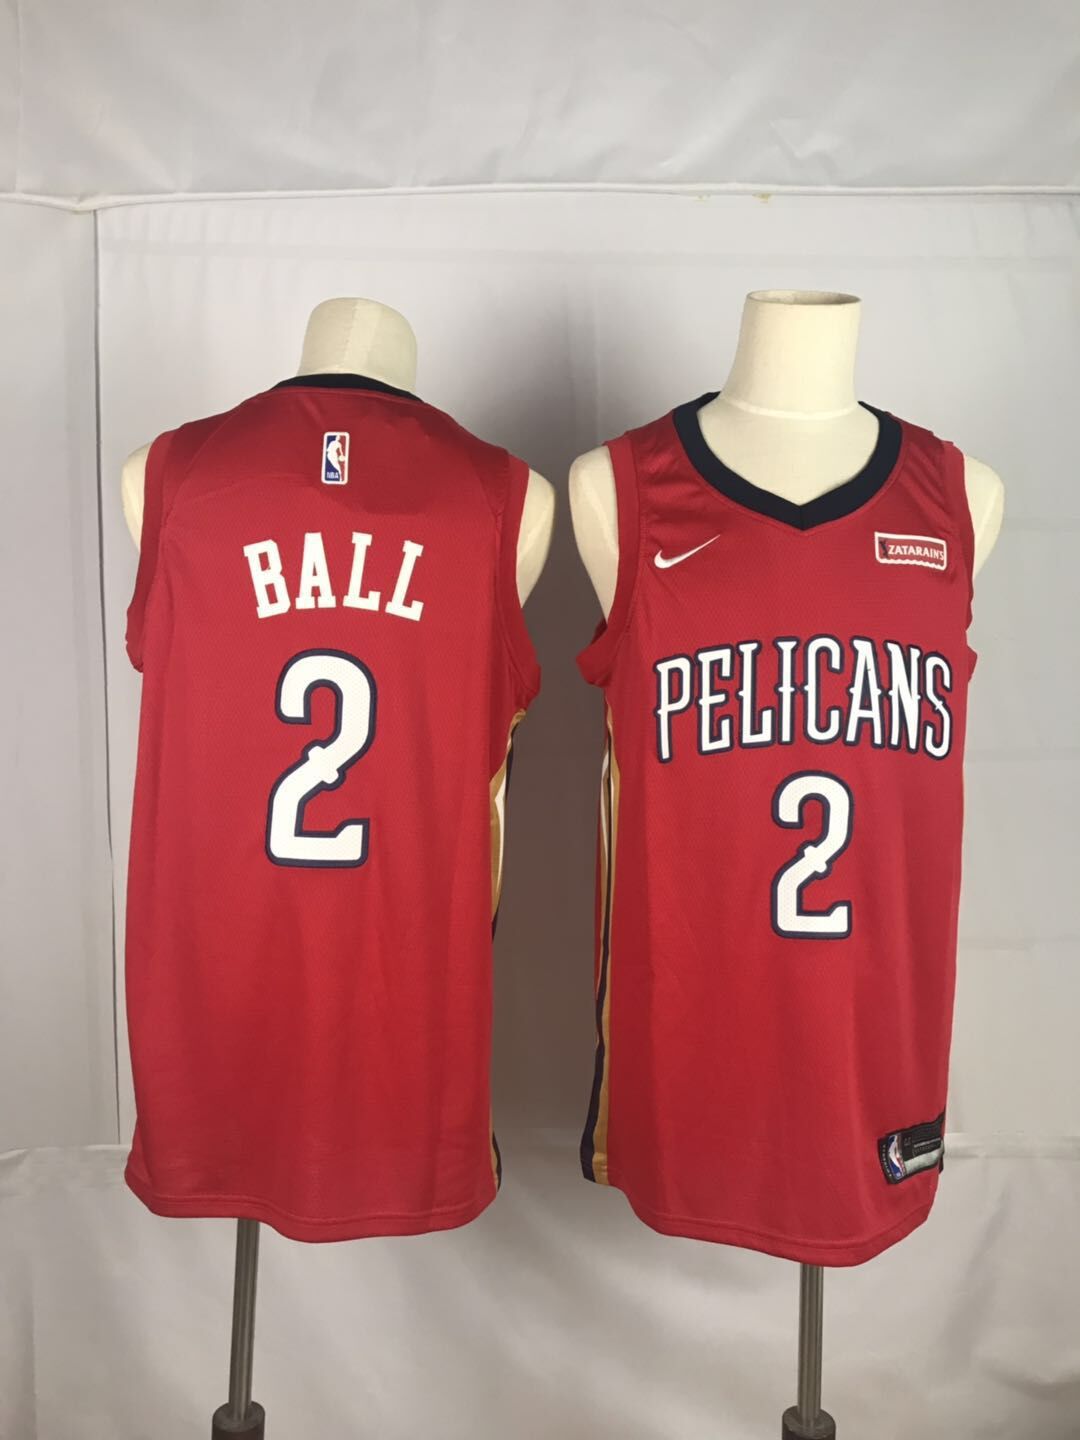 Men New Orleans Pelicans #2 Ball Red Game Nike NBA Jerseys